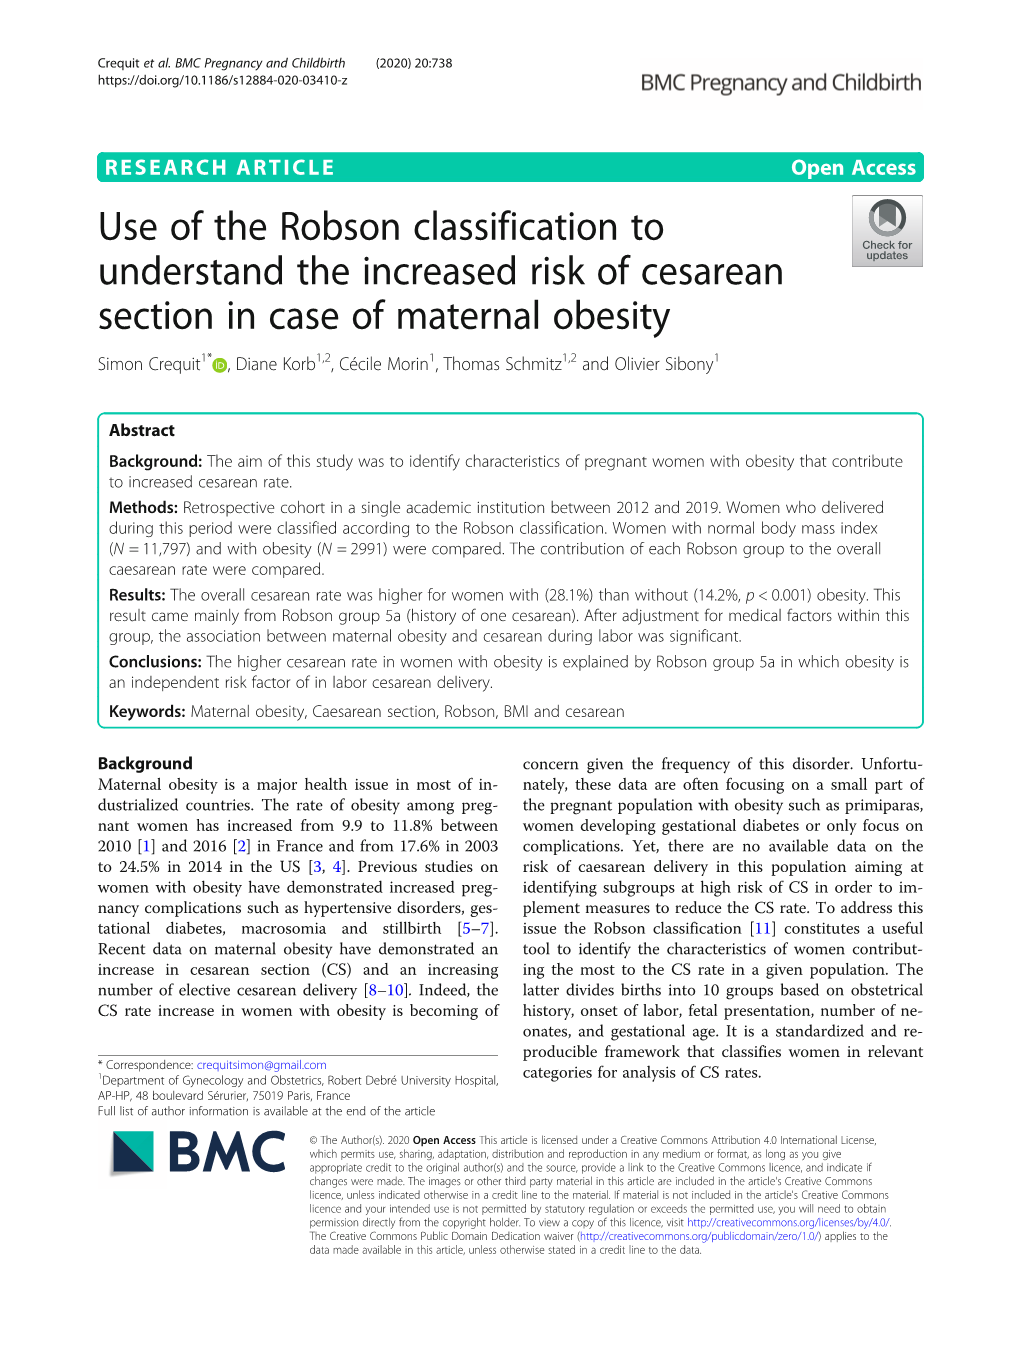 Use of the Robson Classification to Understand the Increased Risk Of